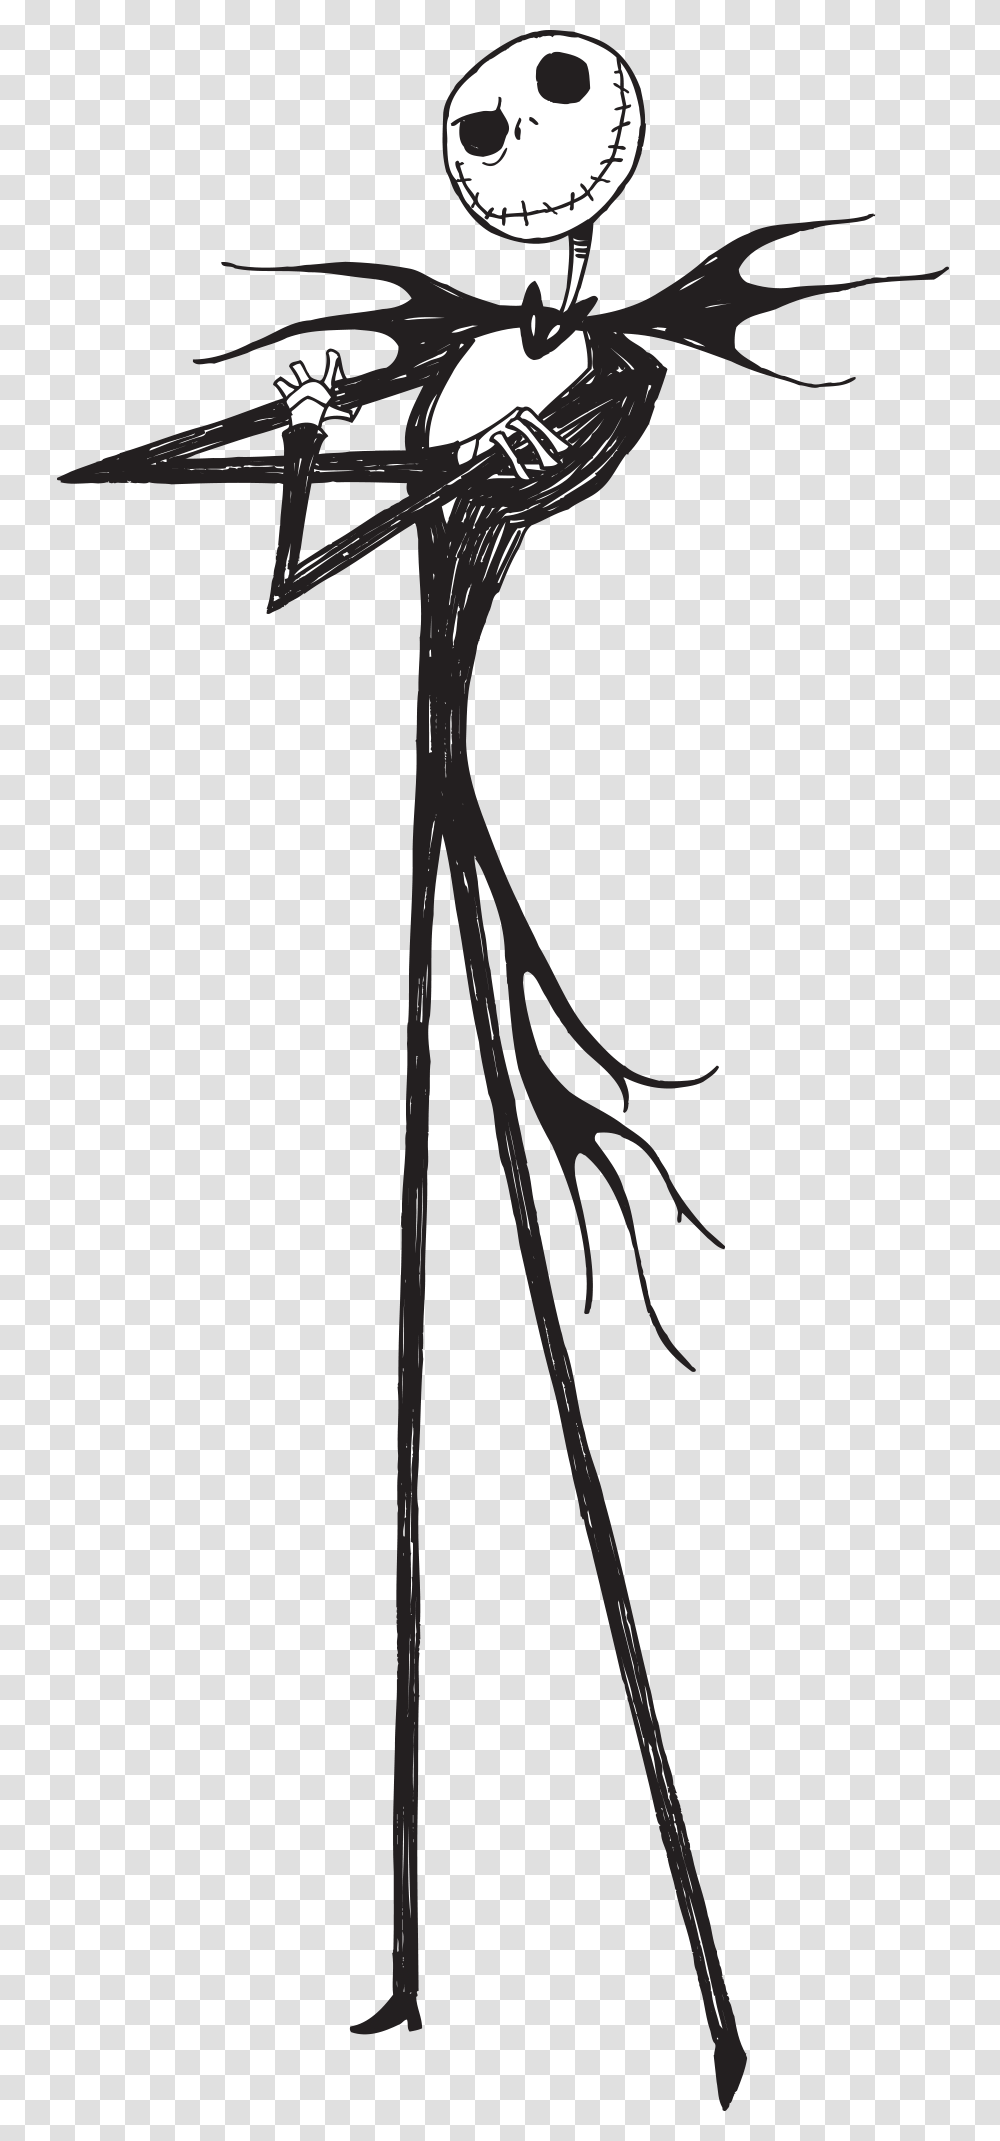 Jack Nightmare Before Christmas Characters Jack Nightmare Before Christmas Characters, Sword, Bow, Cutlery, Chair Transparent Png